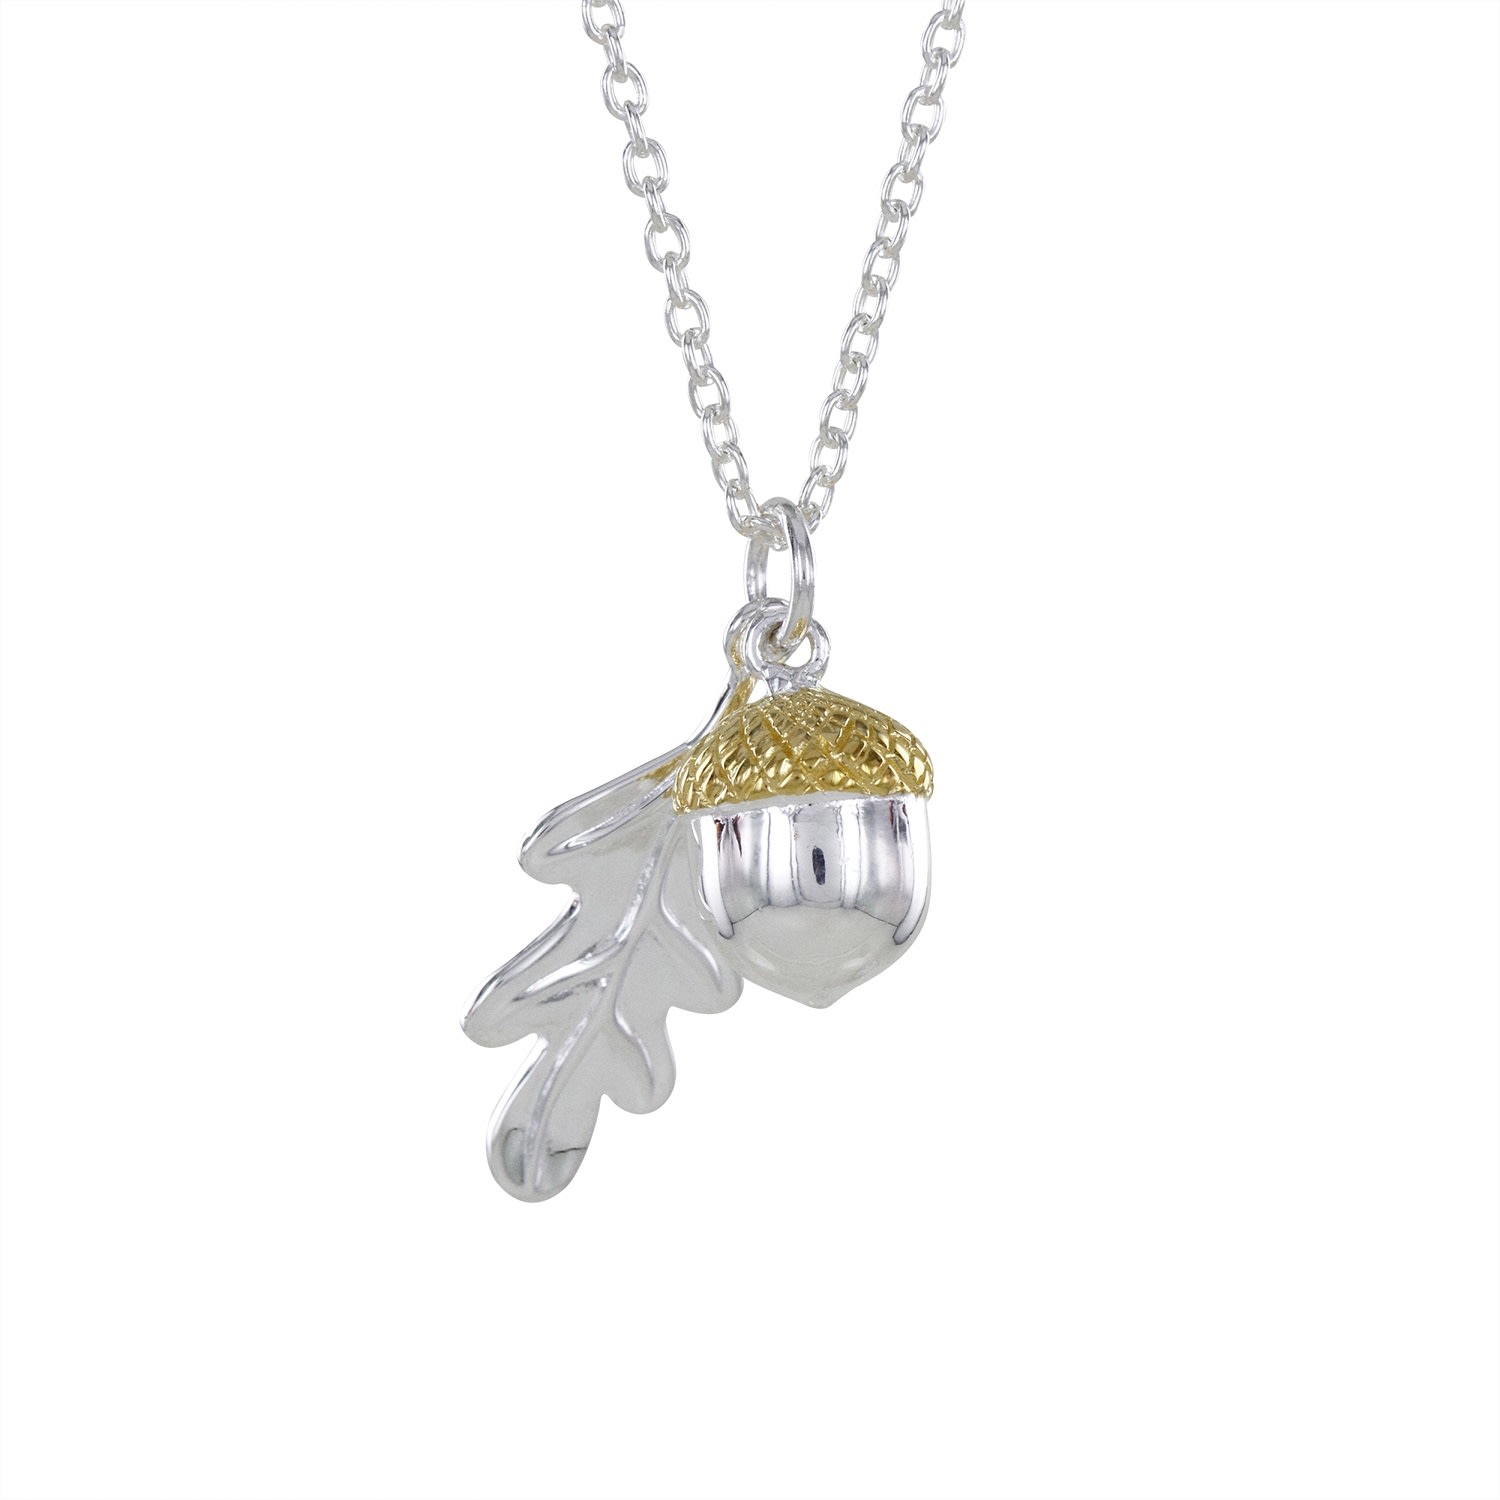 Women’s Silver / Gold Oak Leaf And Acorn Sterling Silver And Gold Plated Necklace Reeves & Reeves